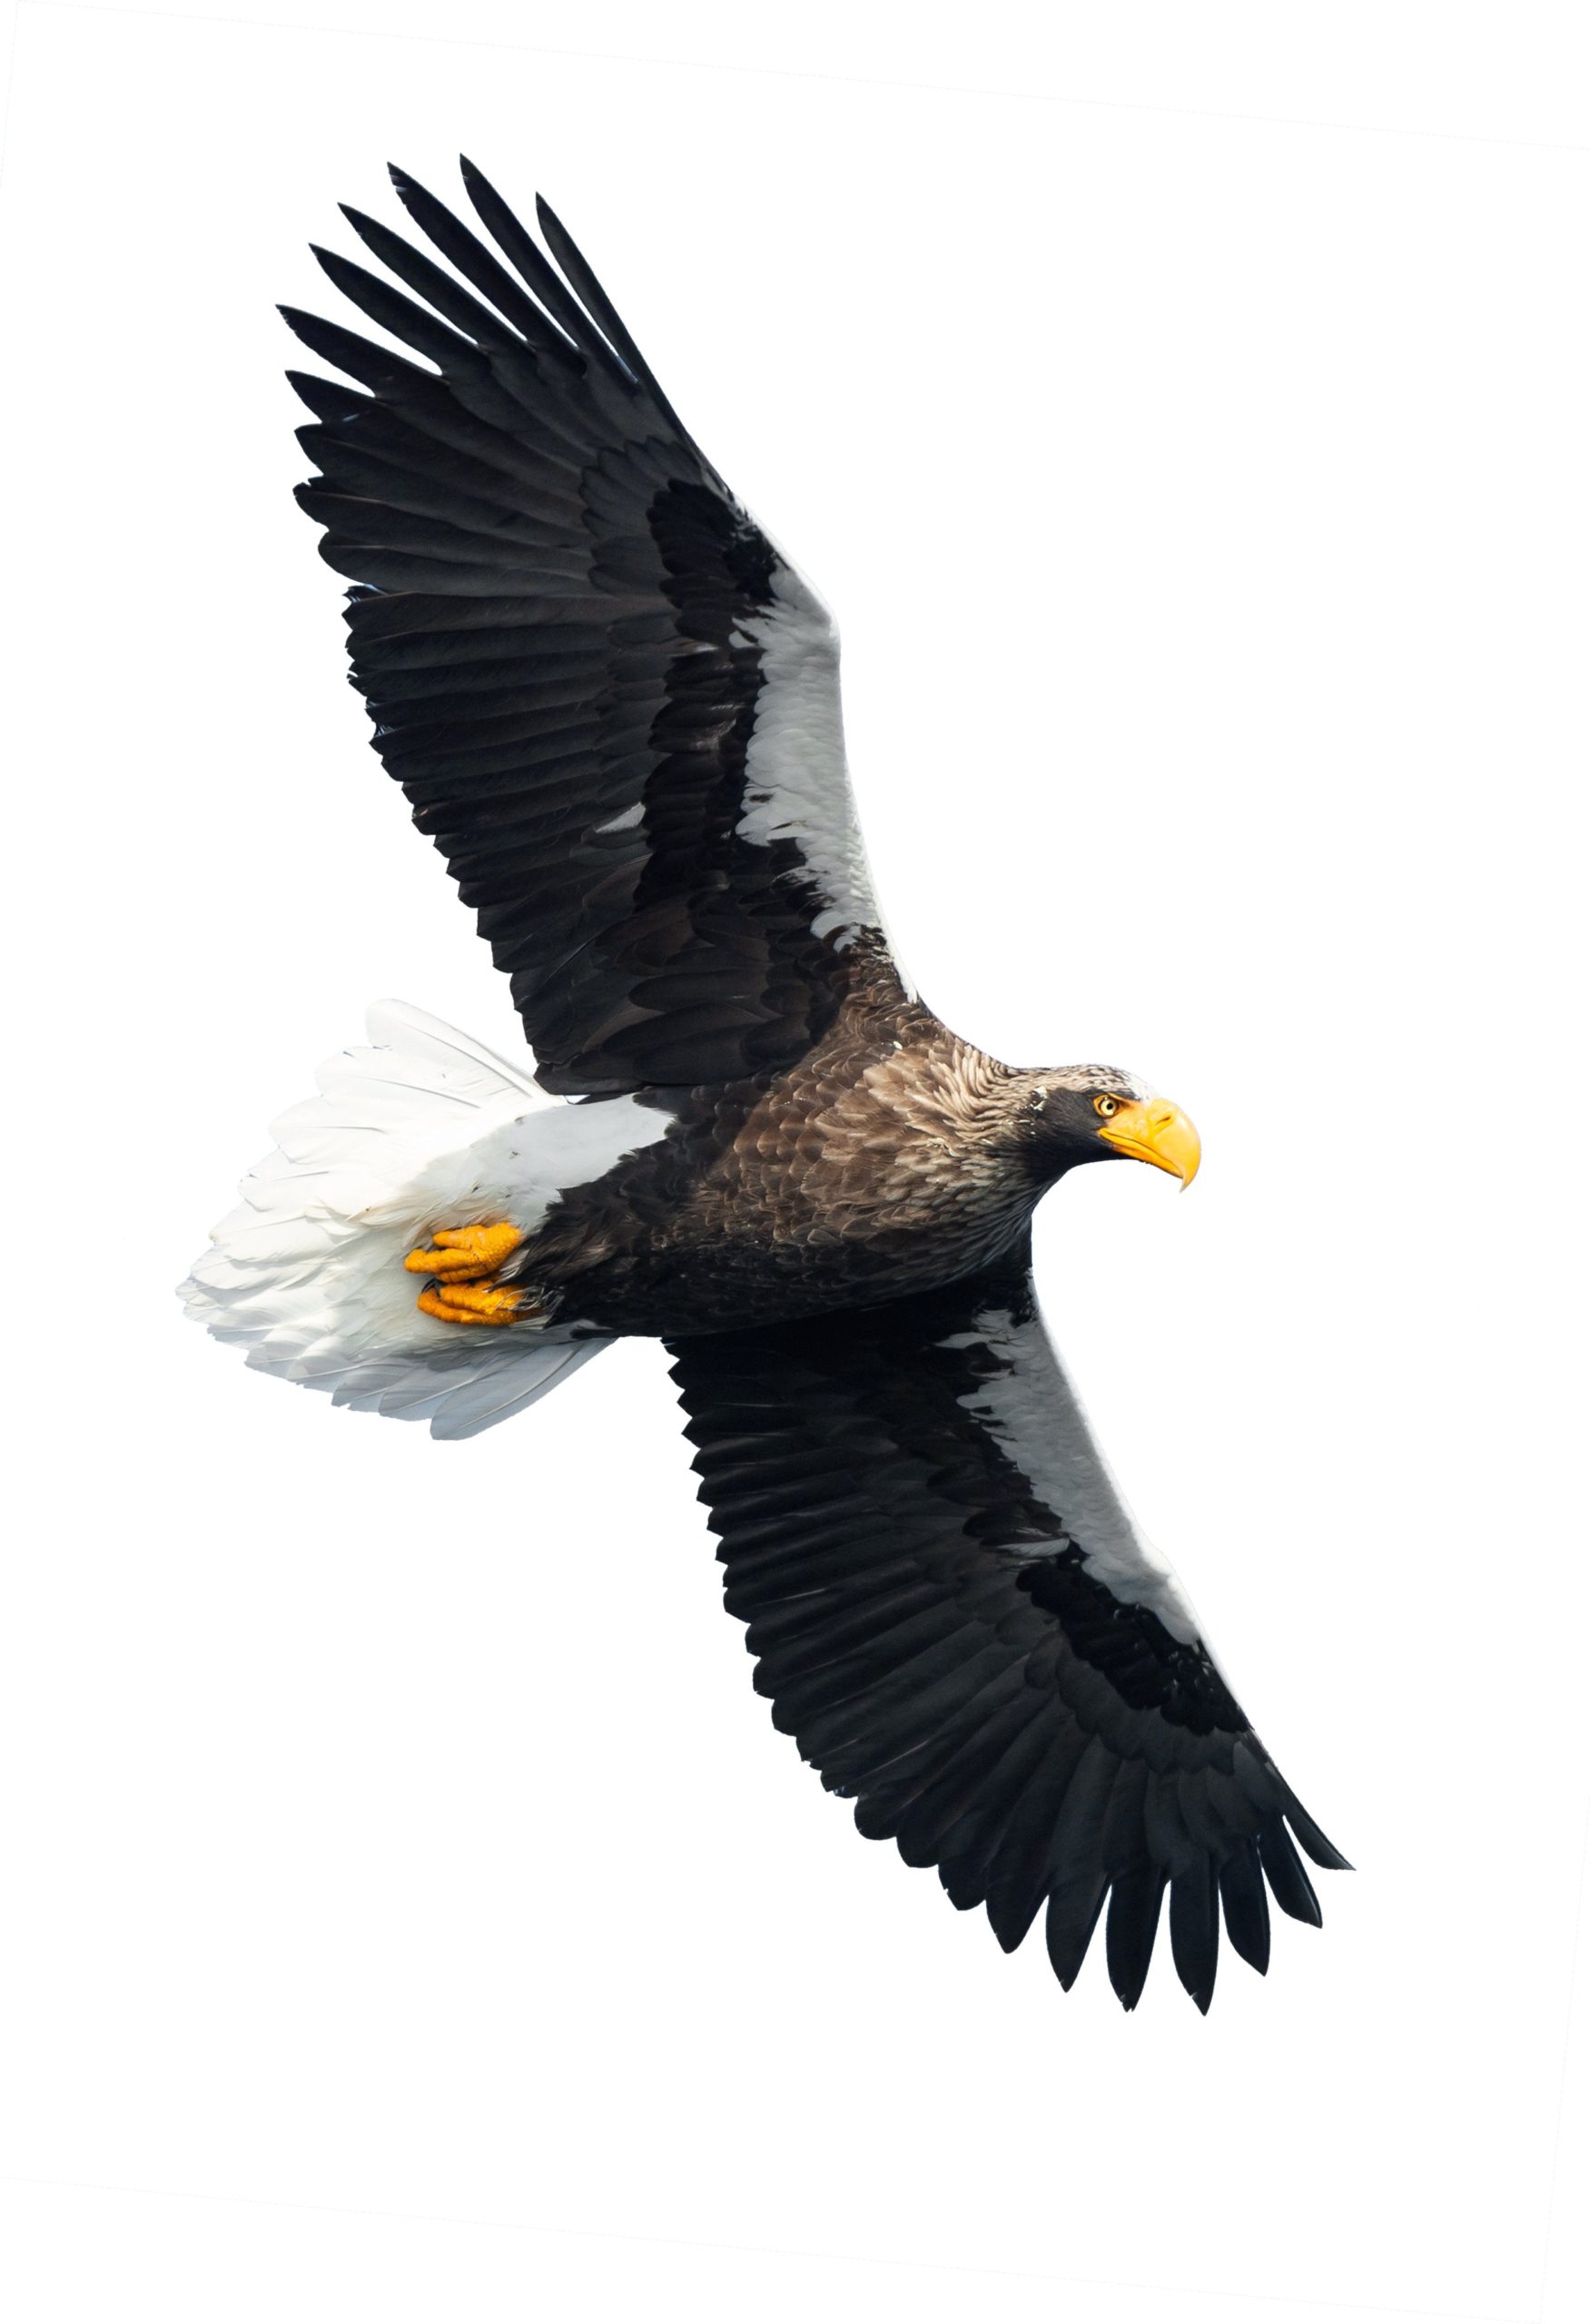 The National Aviary provided this image of a Stellar's sea eagle in flight for reference. (Image: National Aviary)